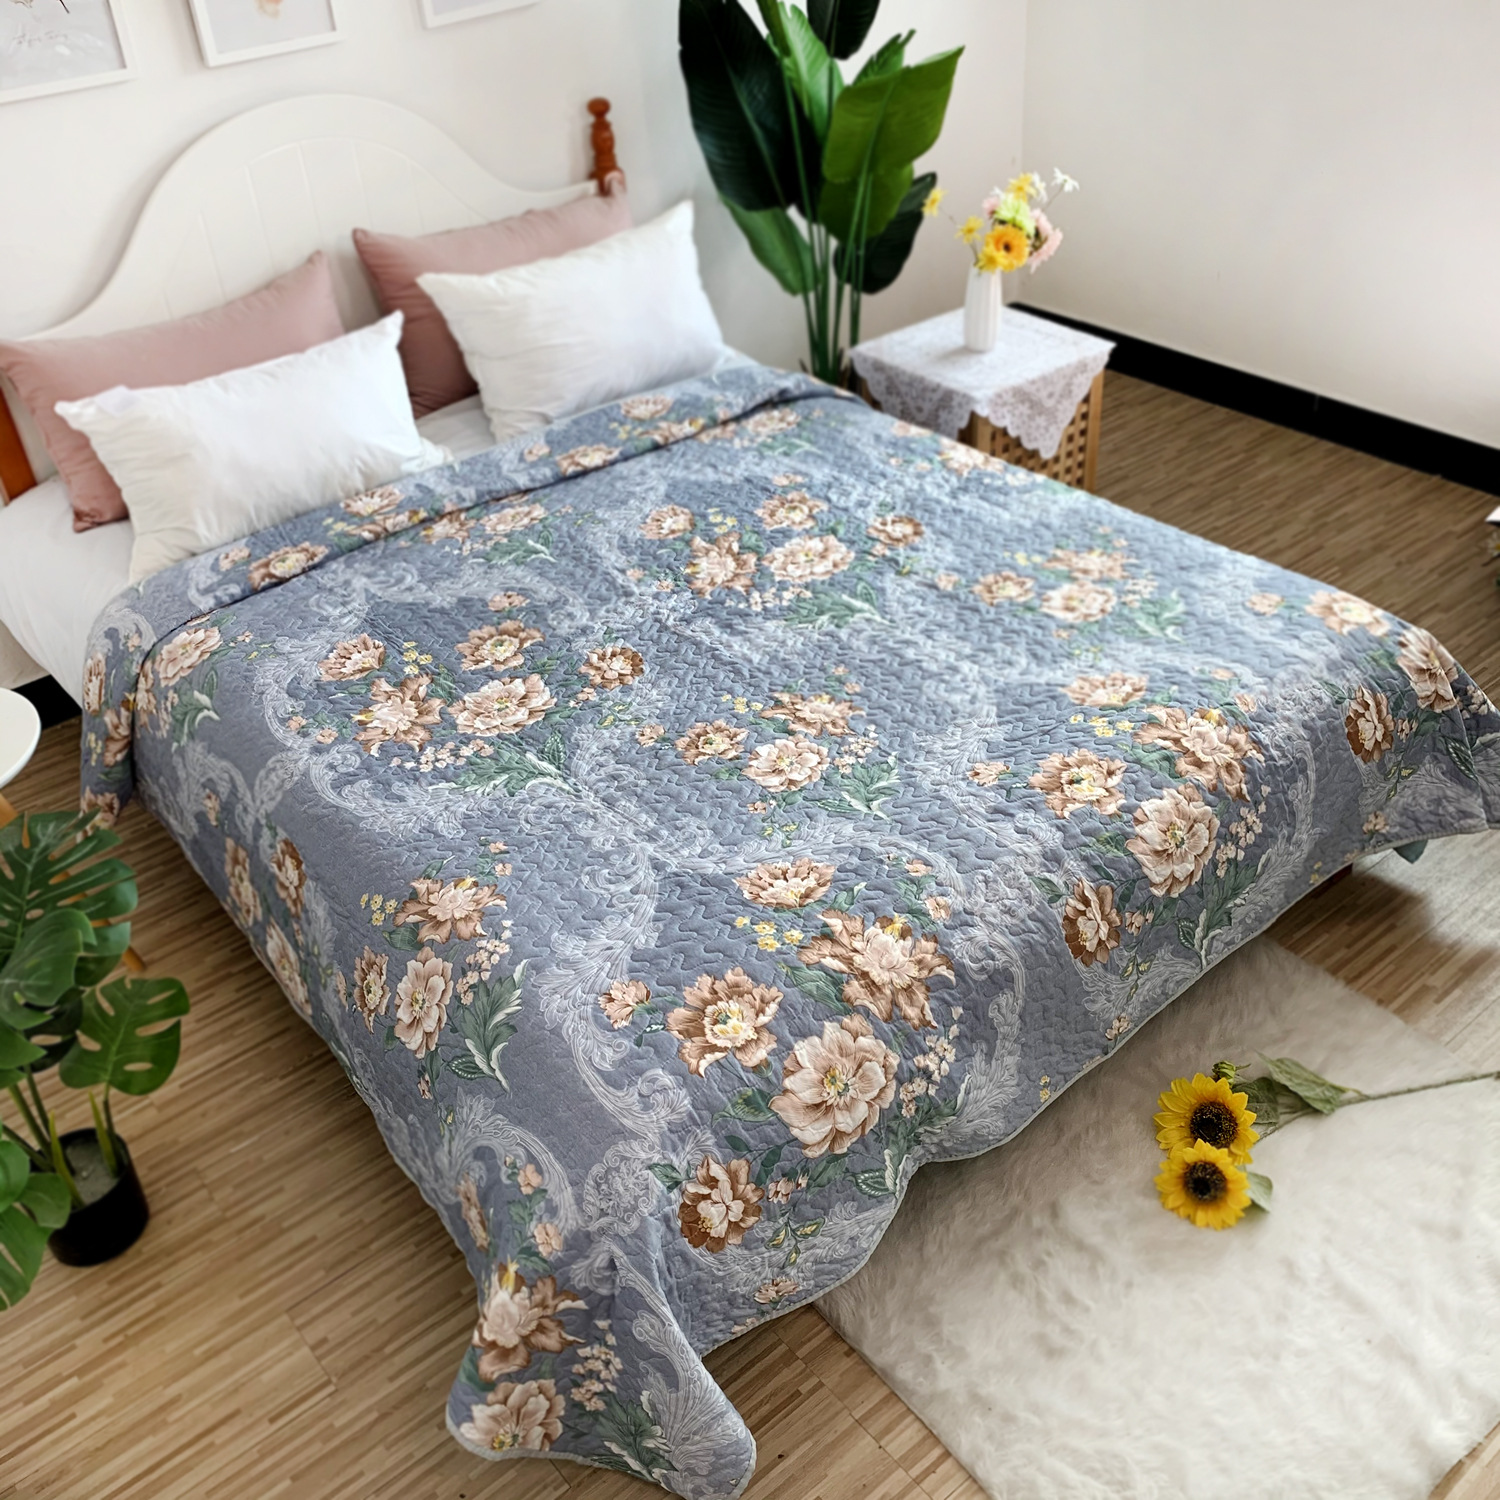 Cotton Air Conditioning Bed Cover Manufacturers, Cotton Air Conditioning Bed Cover Factory, Supply Cotton Air Conditioning Bed Cover